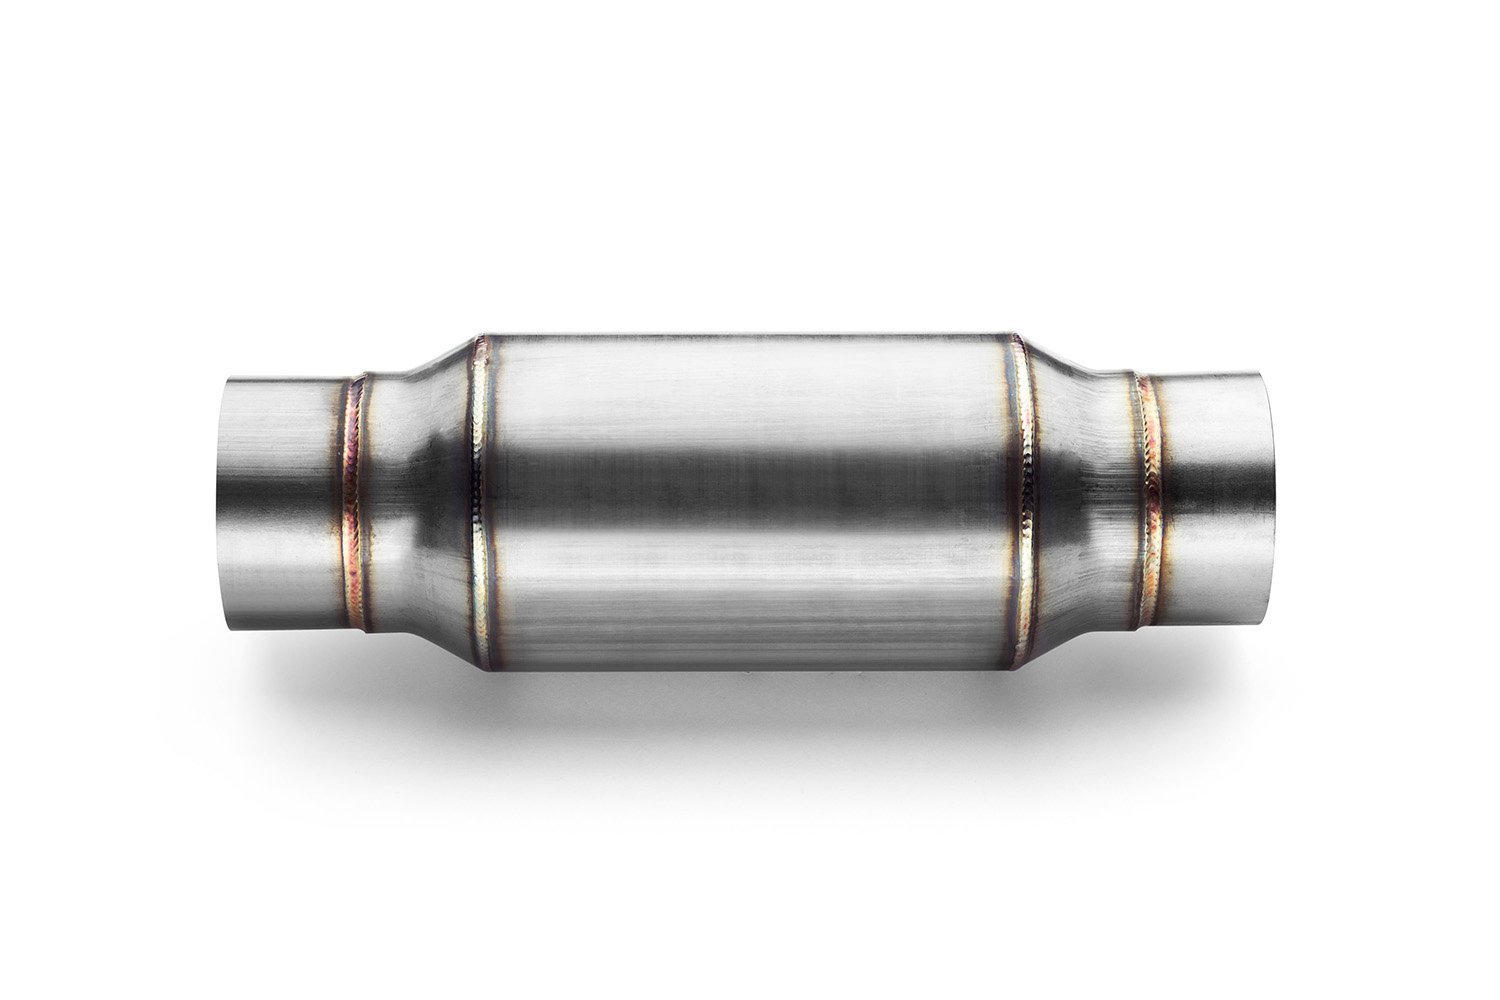 TR-Series Resonator Muffler, Inlet/Outlet: 2.500 in., Overall Length: 10.500 in. [Mirror Polished Finish]